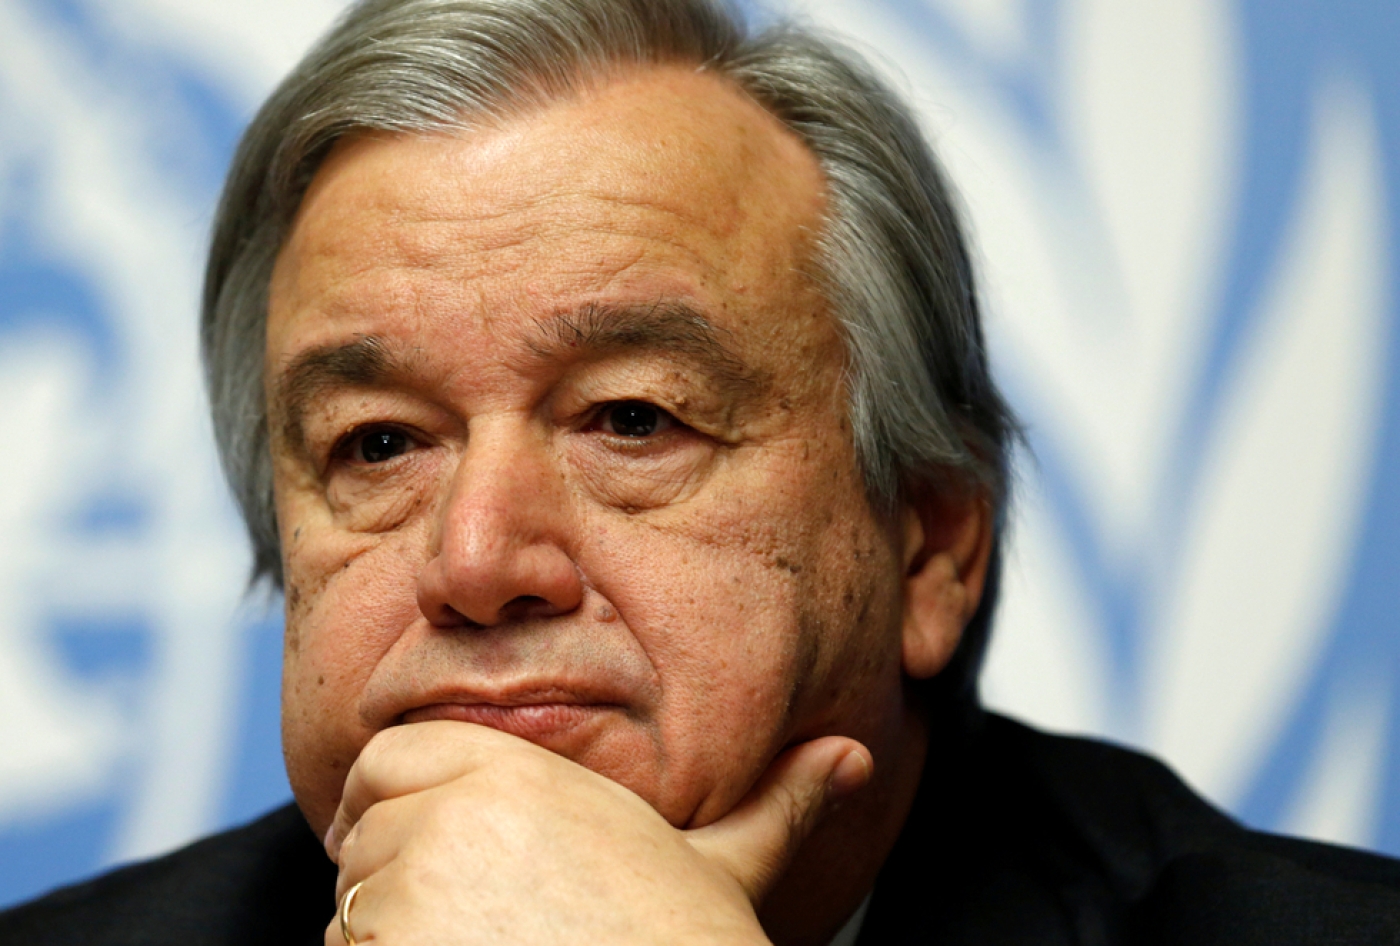 Antonio Guterres called in particular for all nations to respect the UN arms embargo on Libya.